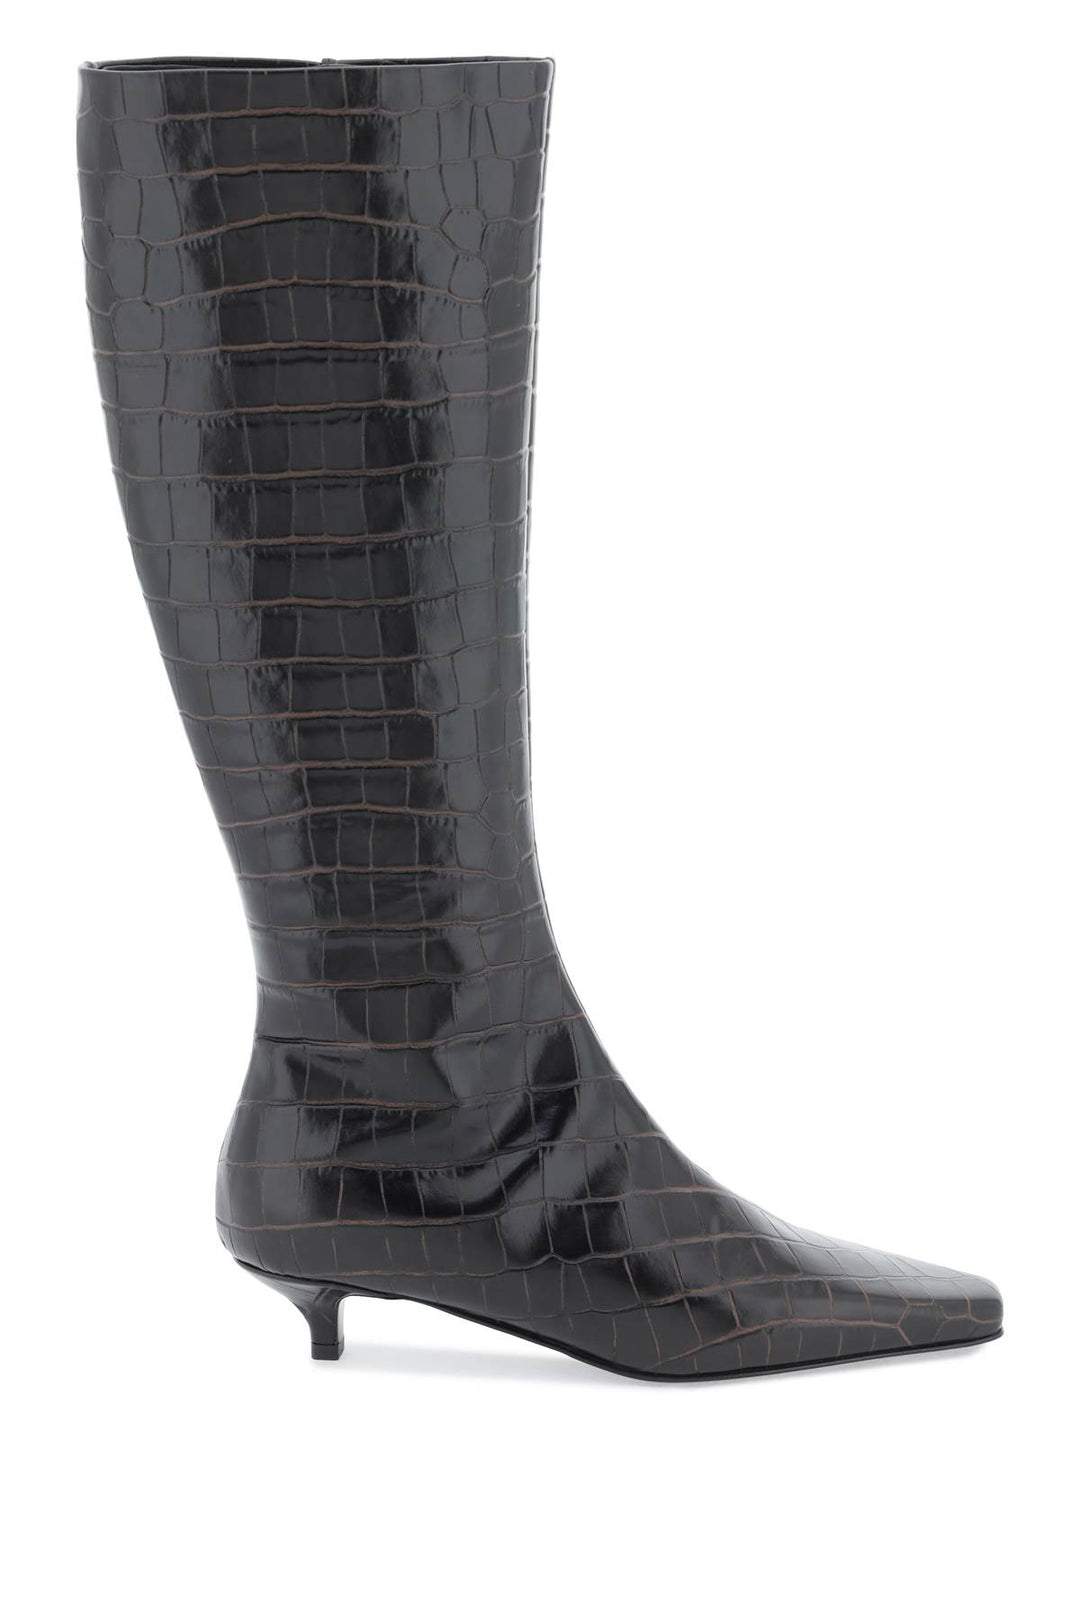 Toteme The Slim Knee High Boots In Crocodile Effect Leather   Marrone